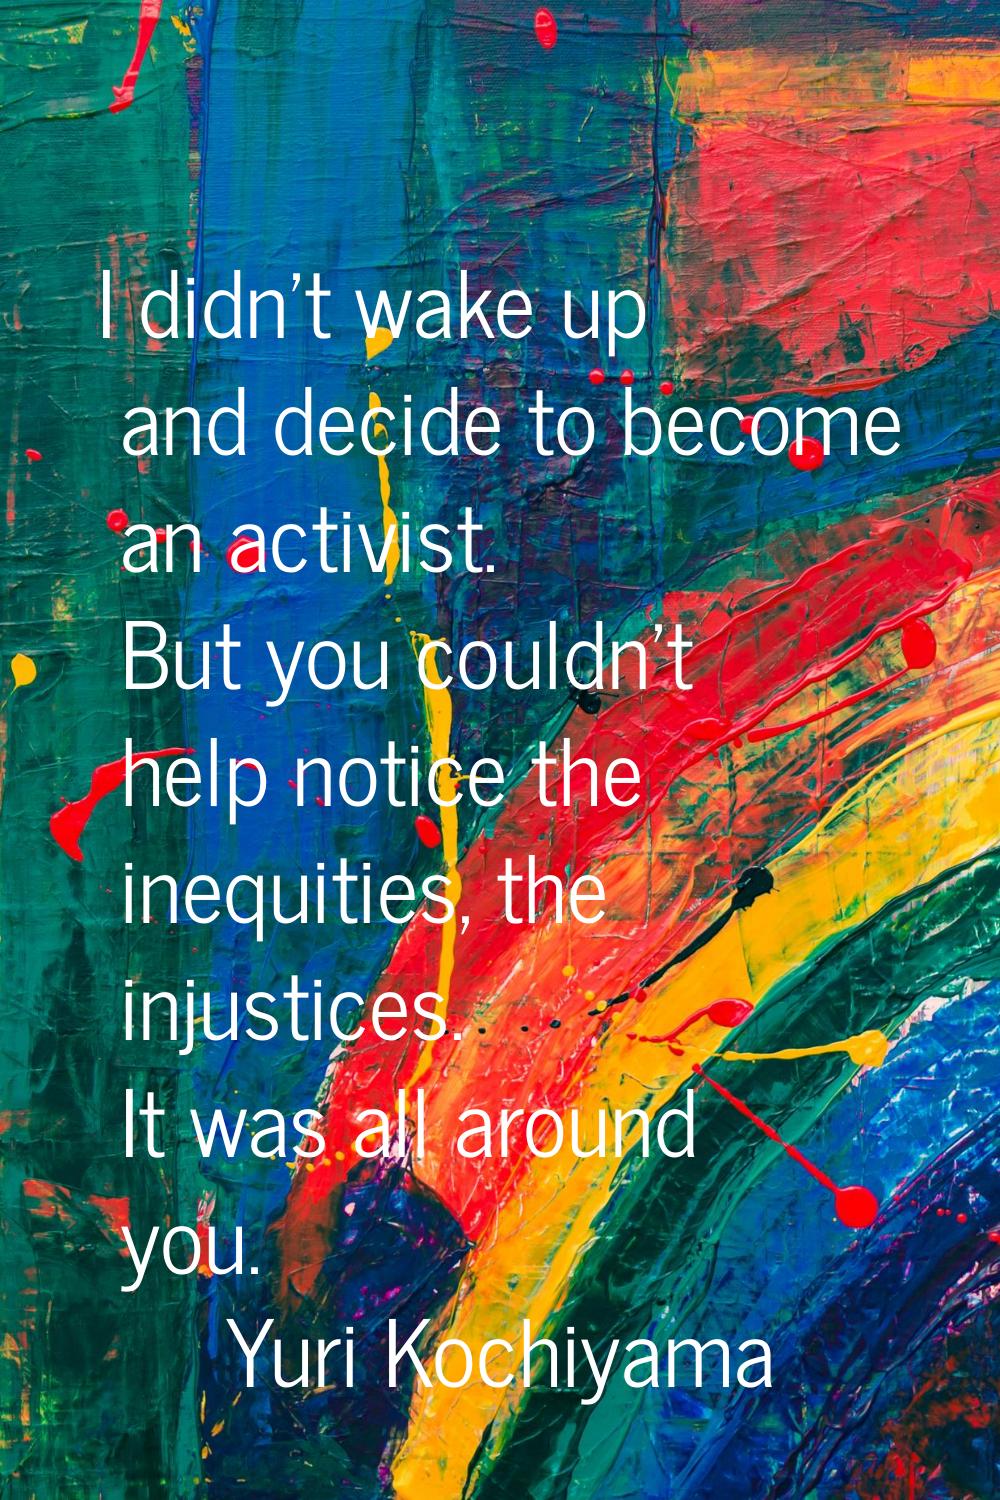 I didn't wake up and decide to become an activist. But you couldn't help notice the inequities, the